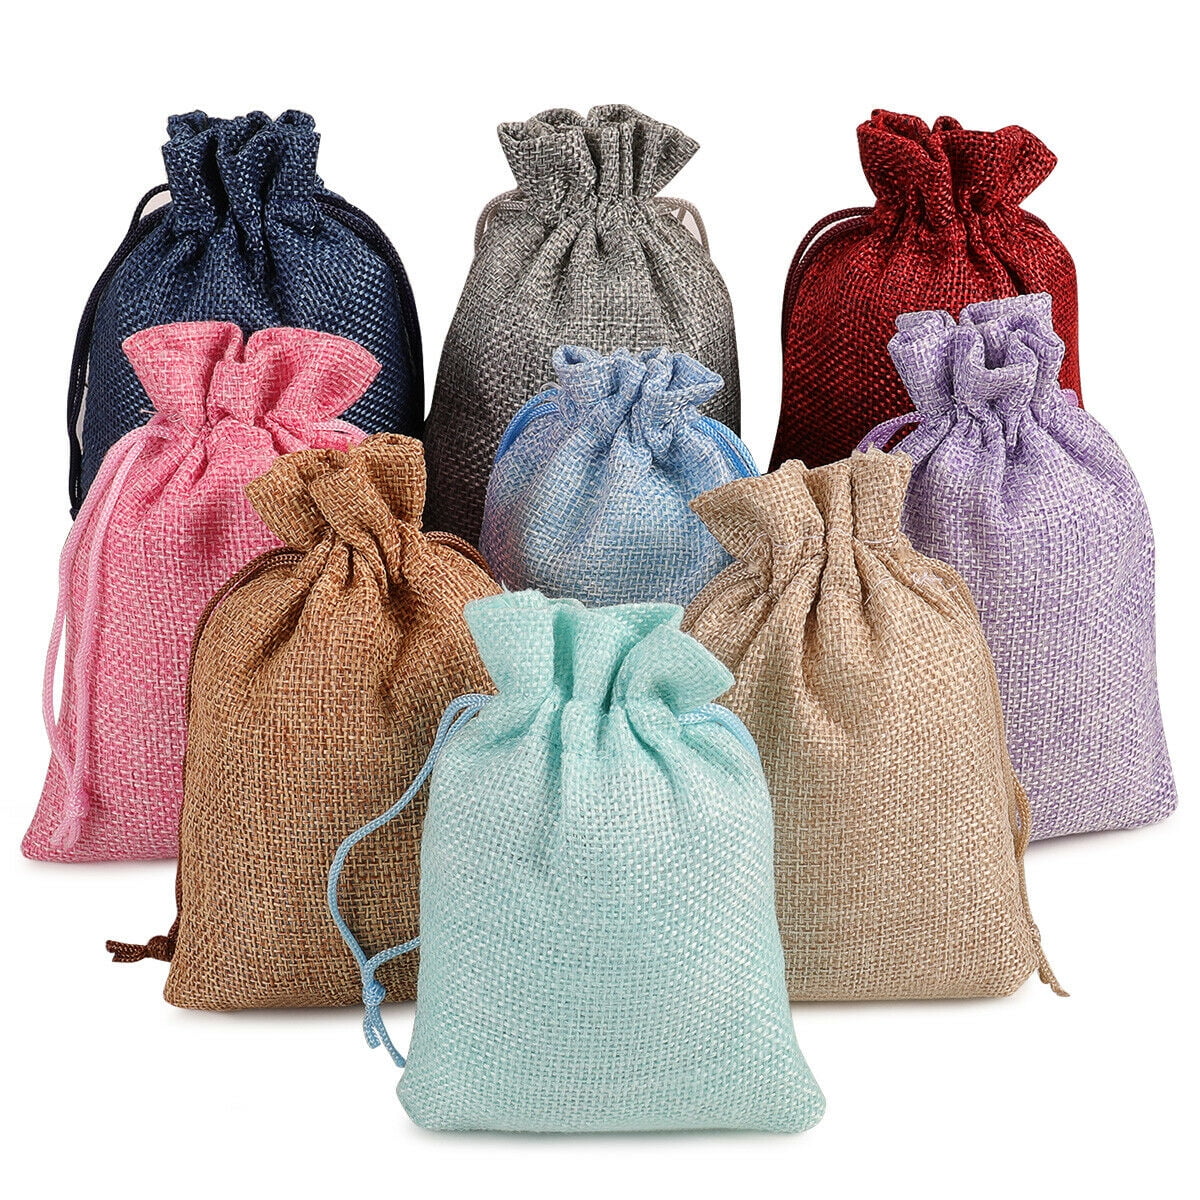 Jewelry Gift Bags and Pouches